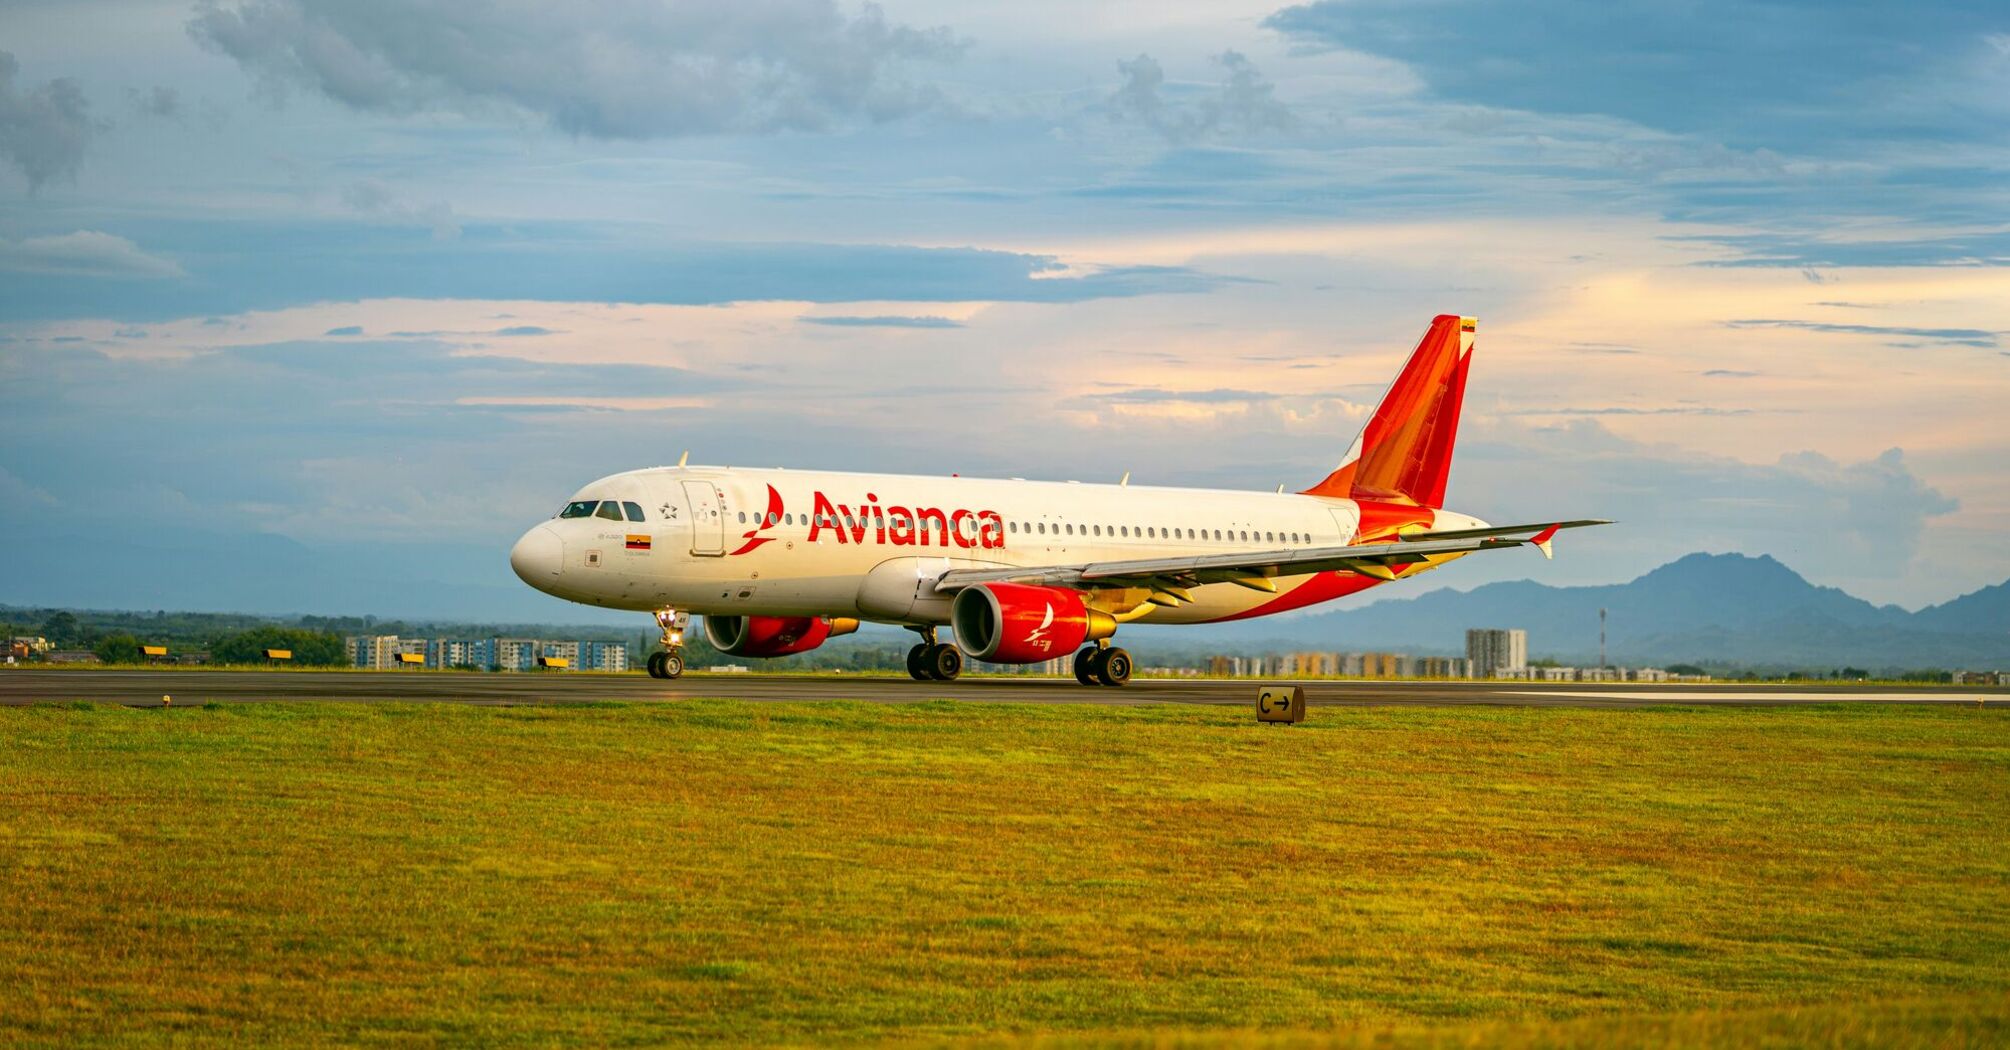 An Avianca airplane is taxiing on the runway with a backdrop of a scenic, cloud-streaked sky and distant mountains